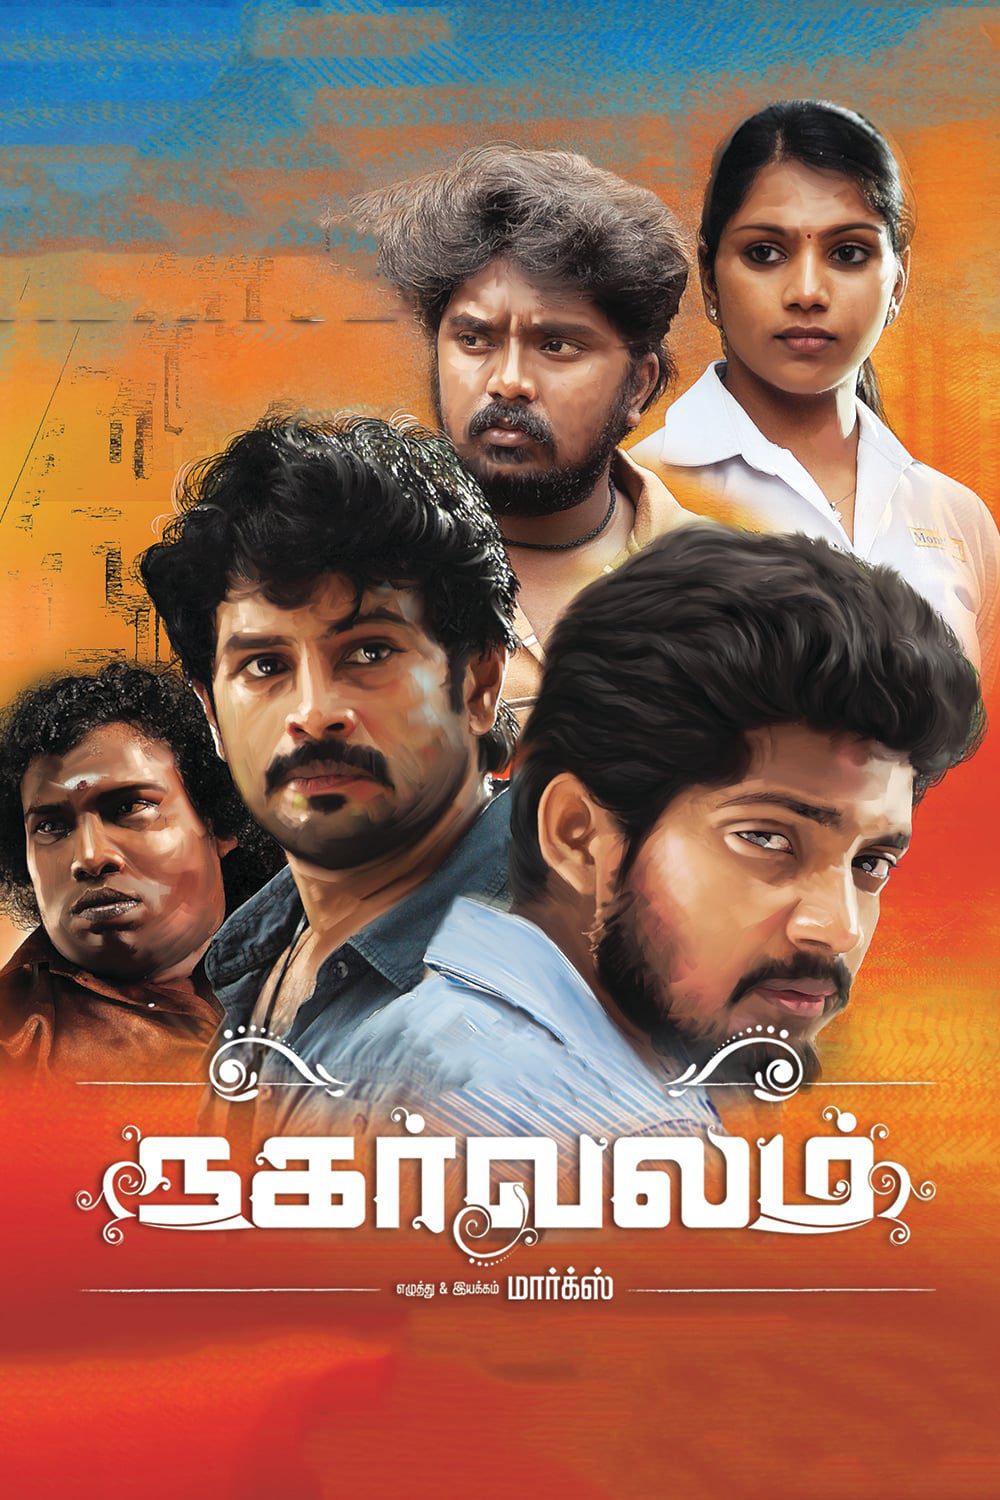 Poster for the movie "Nagarvalam"